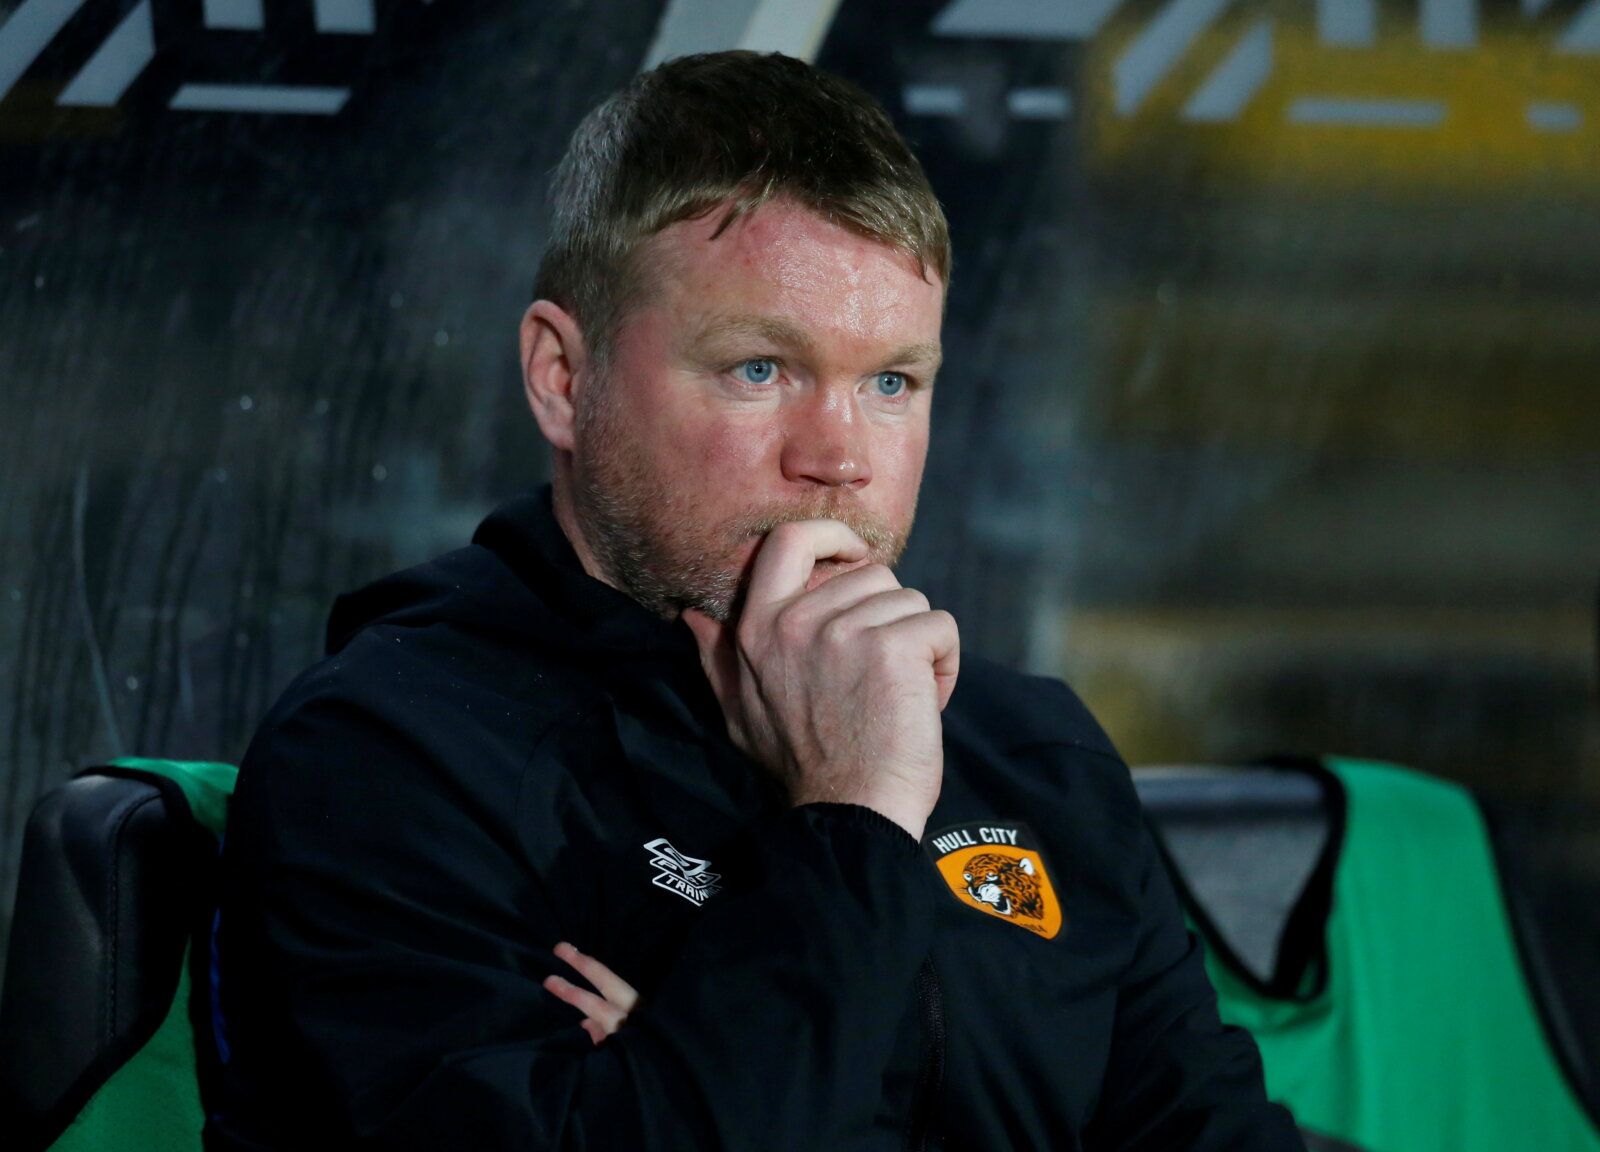 Soccer Football - Championship - Hull City v Blackpool - KCOM Stadium, Hull, Britain - September 28, 2021  Hull City manager Grant McCann before the match  Action Images/Ed Sykes  EDITORIAL USE ONLY. No use with unauthorized audio, video, data, fixture lists, club/league logos or 